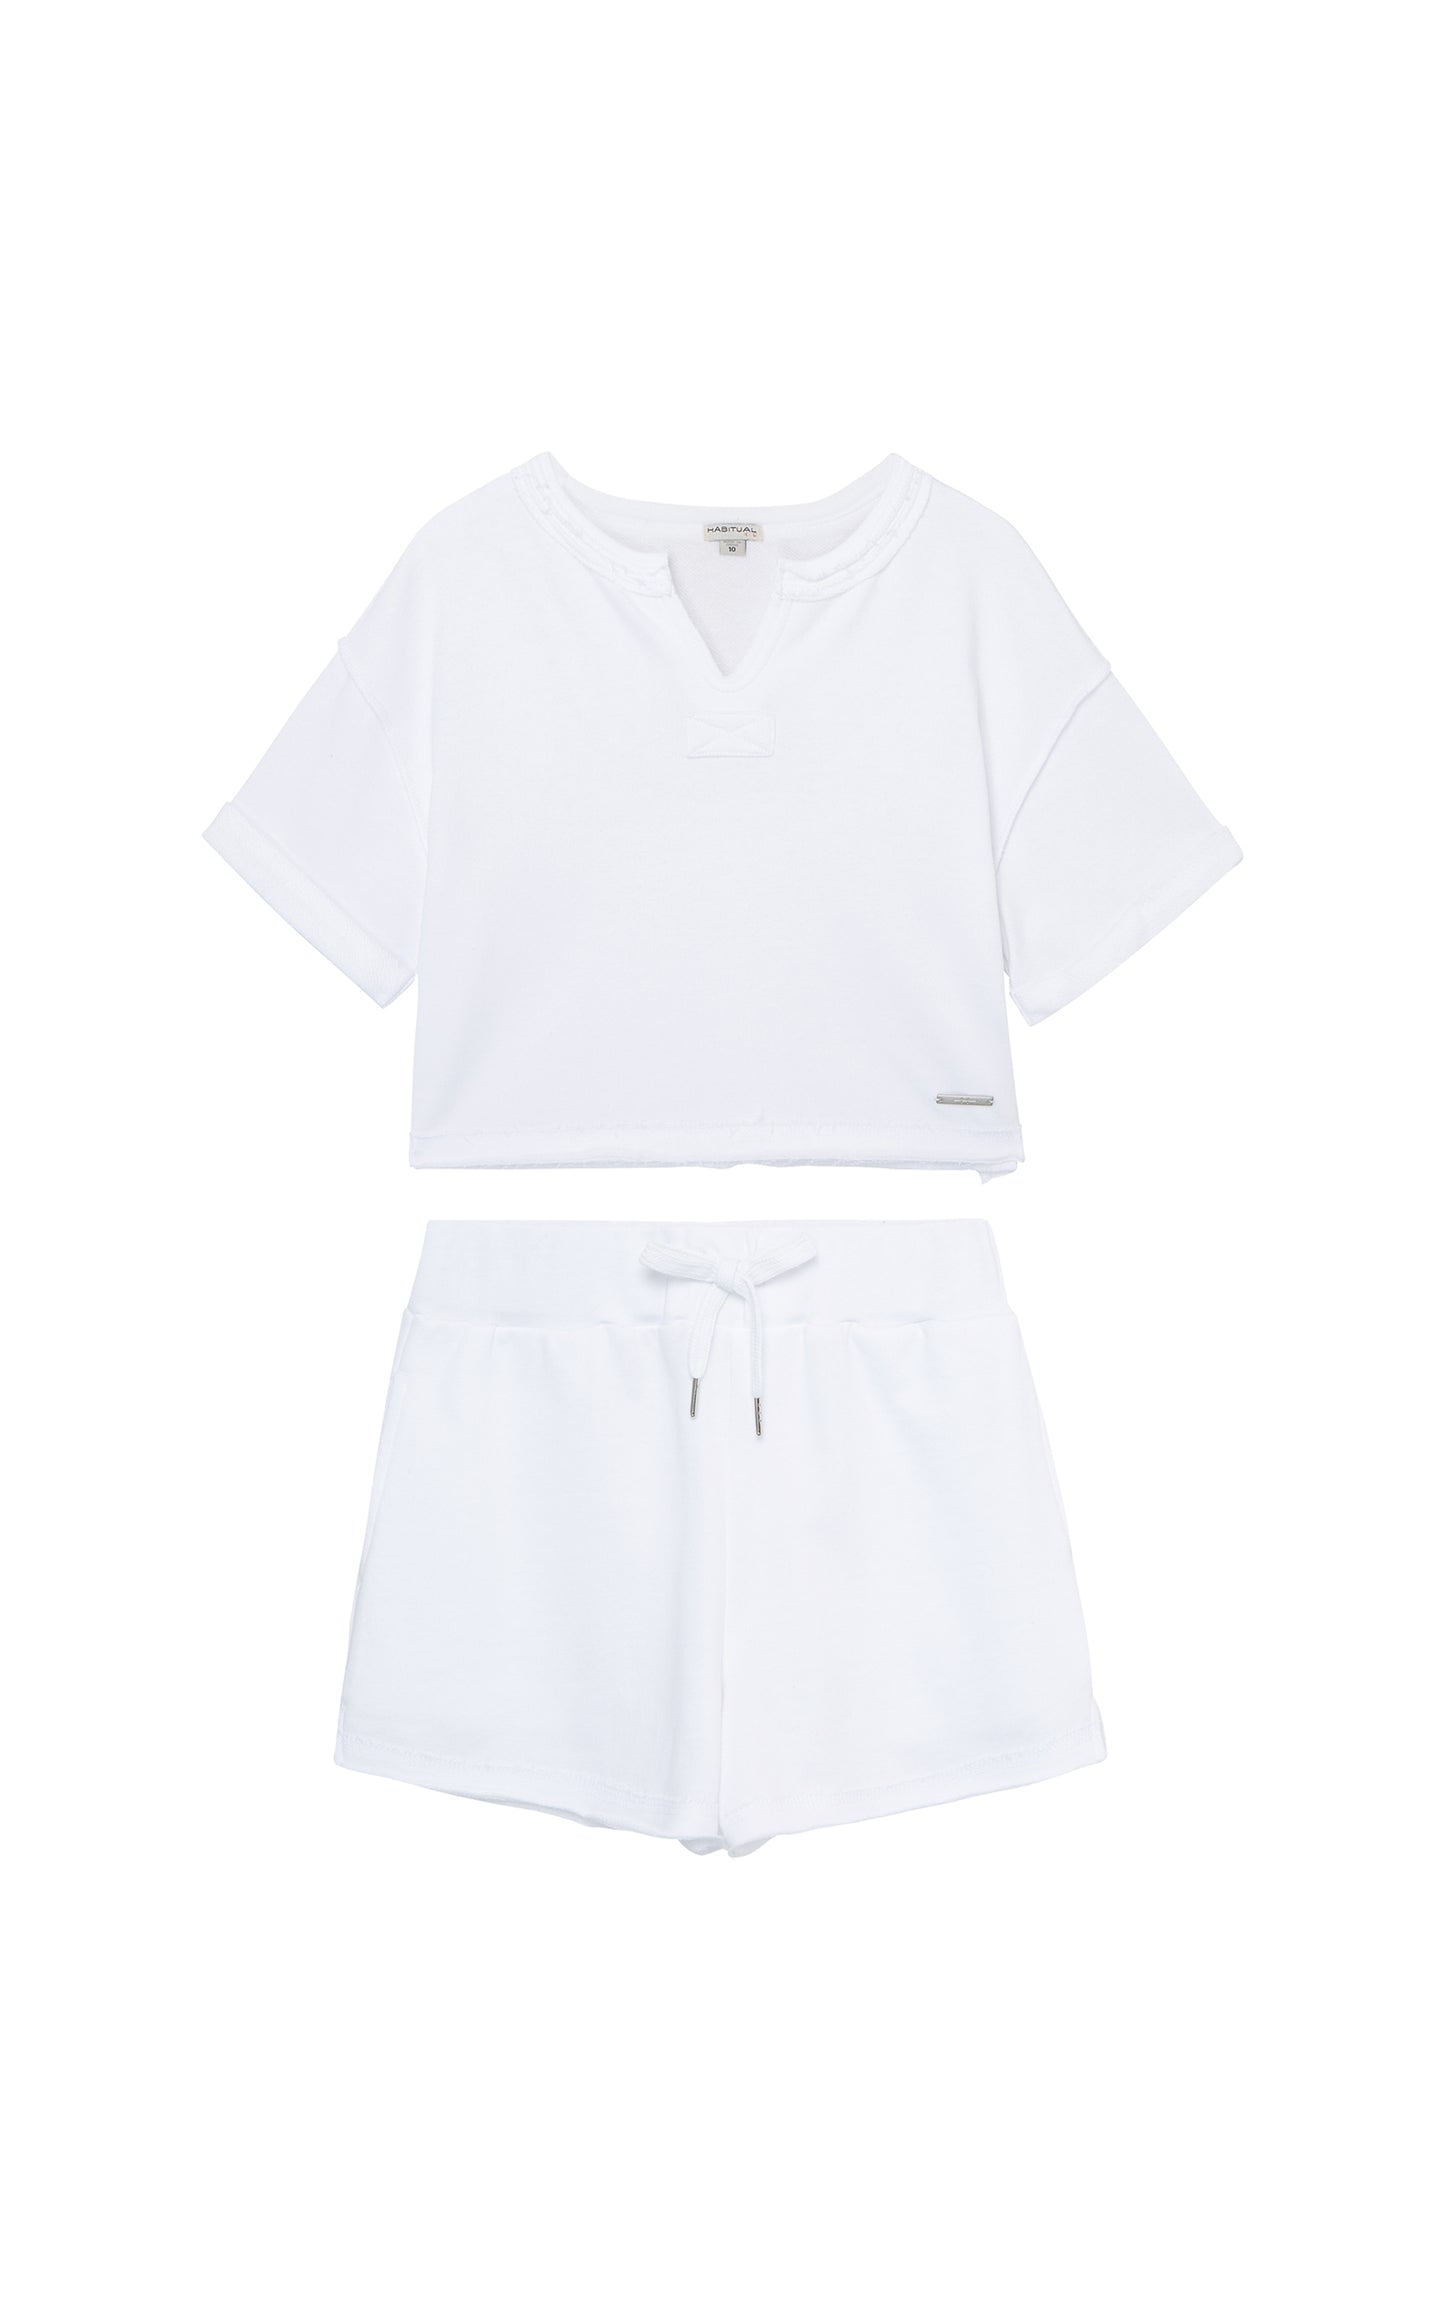 White French terry cloth shirt and short set